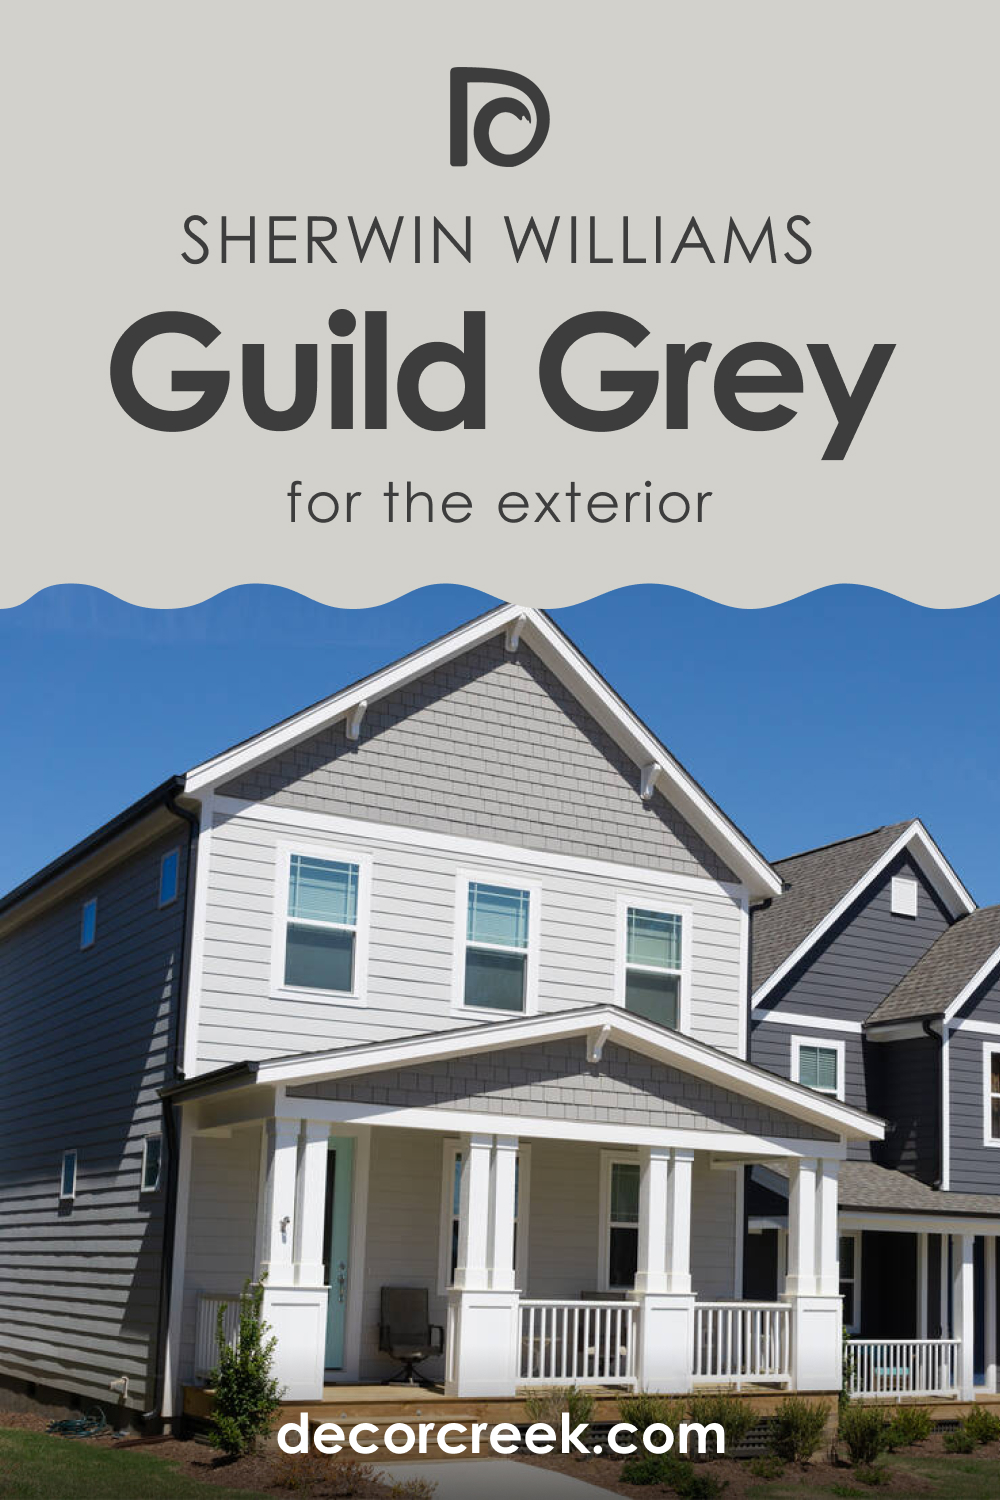 How to Use SW 9561 Guild Grey for an Exterior?